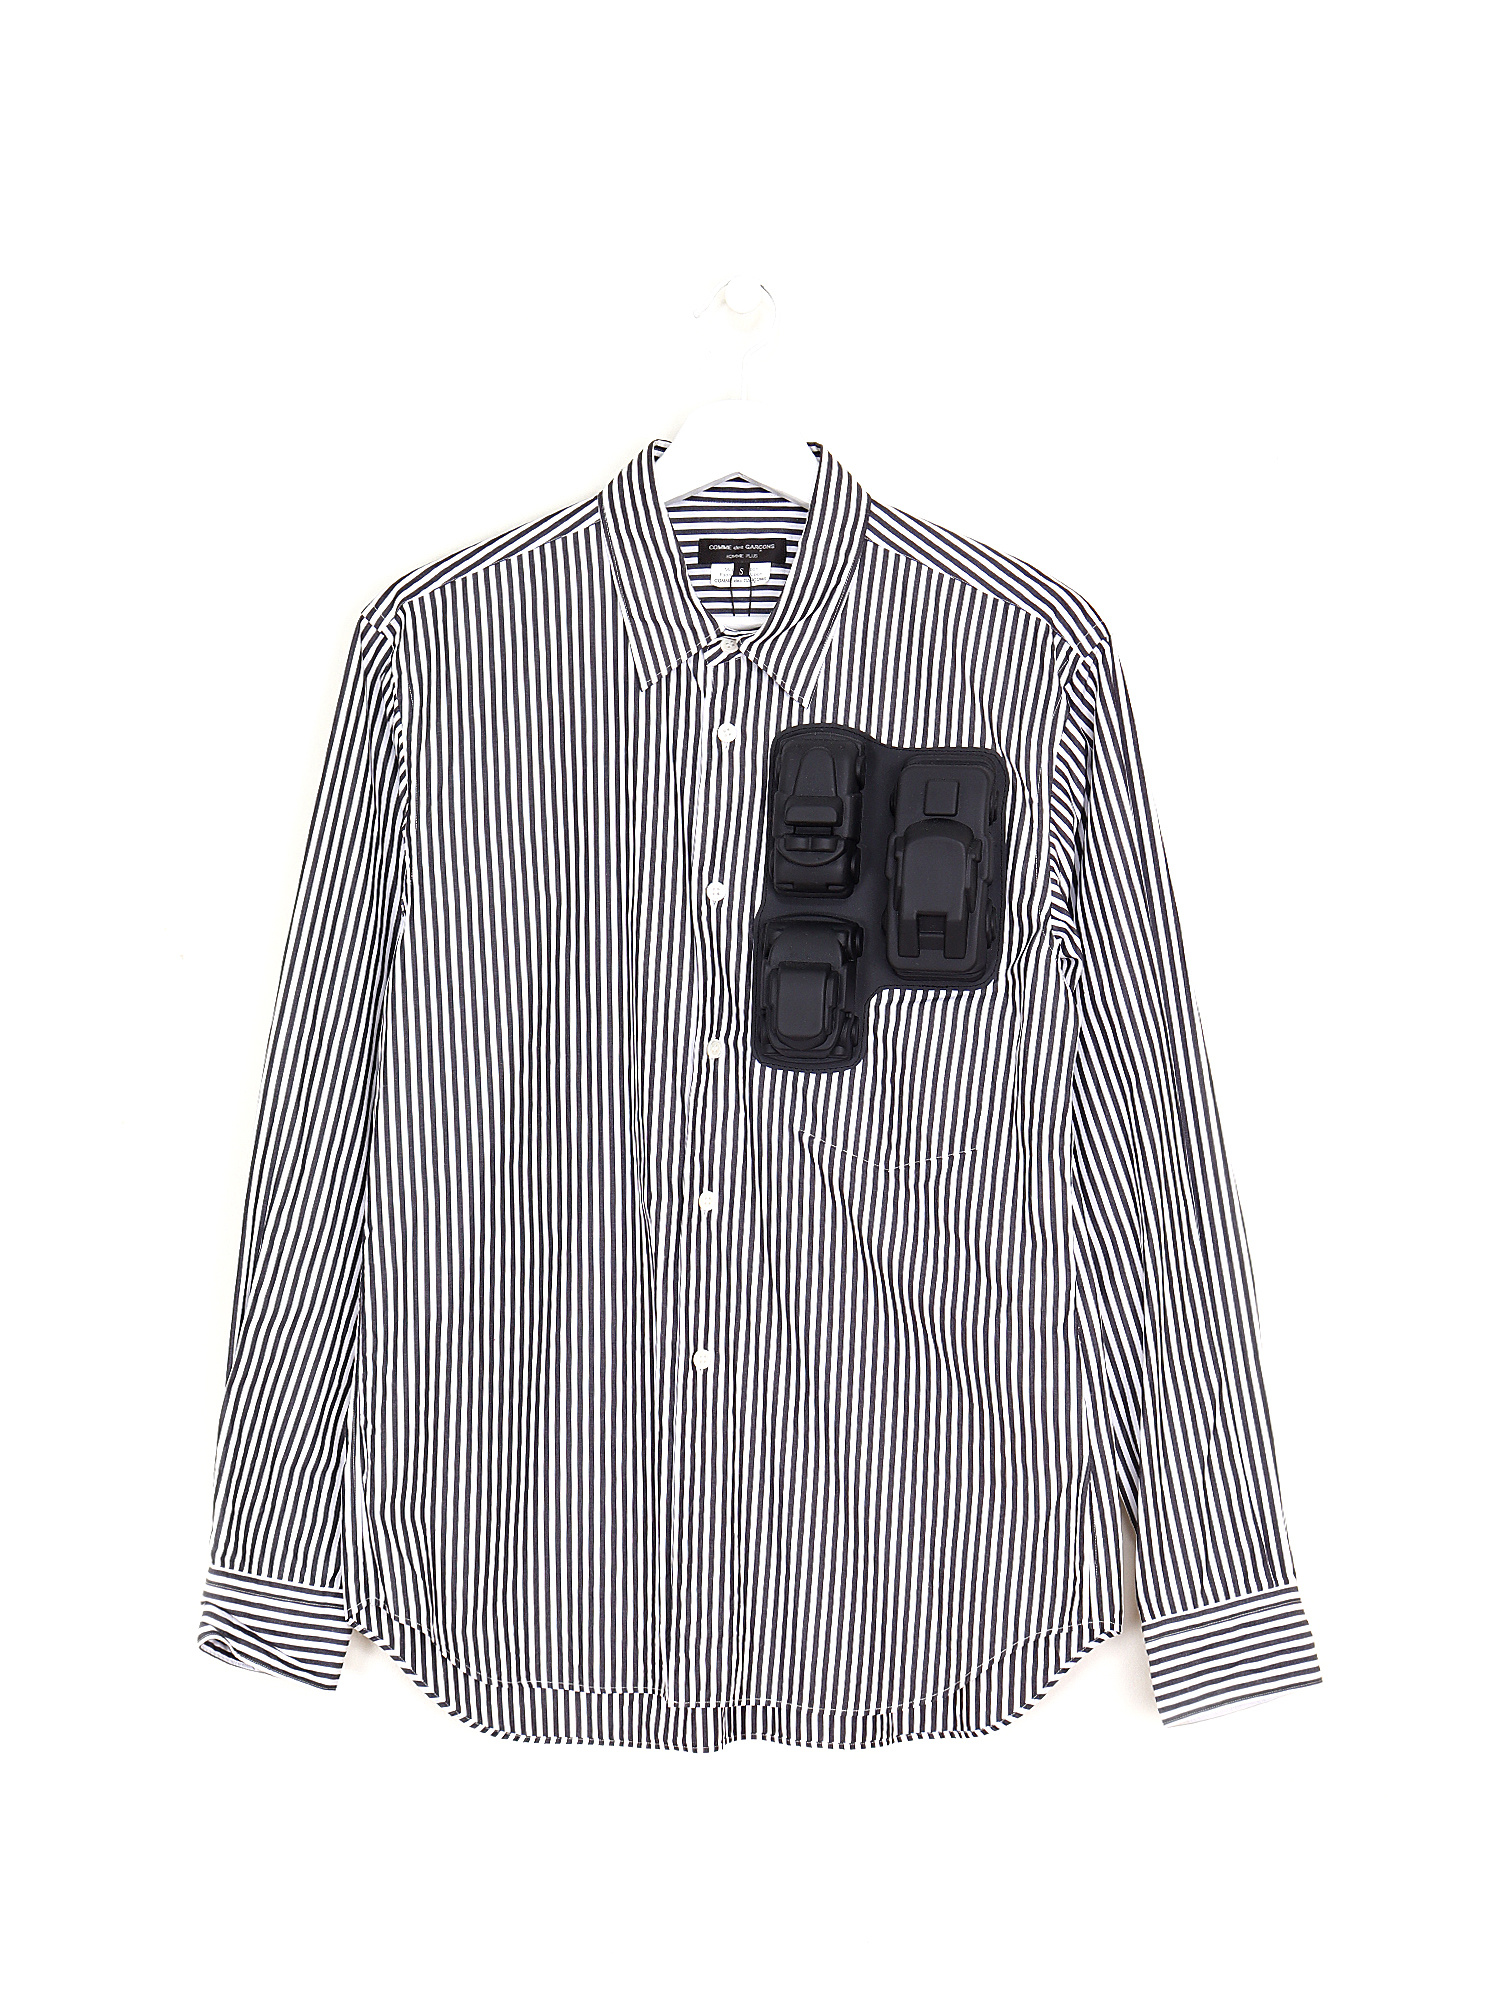 COMME des GARÇONS Homme Plusおもちゃストライプシャツ-